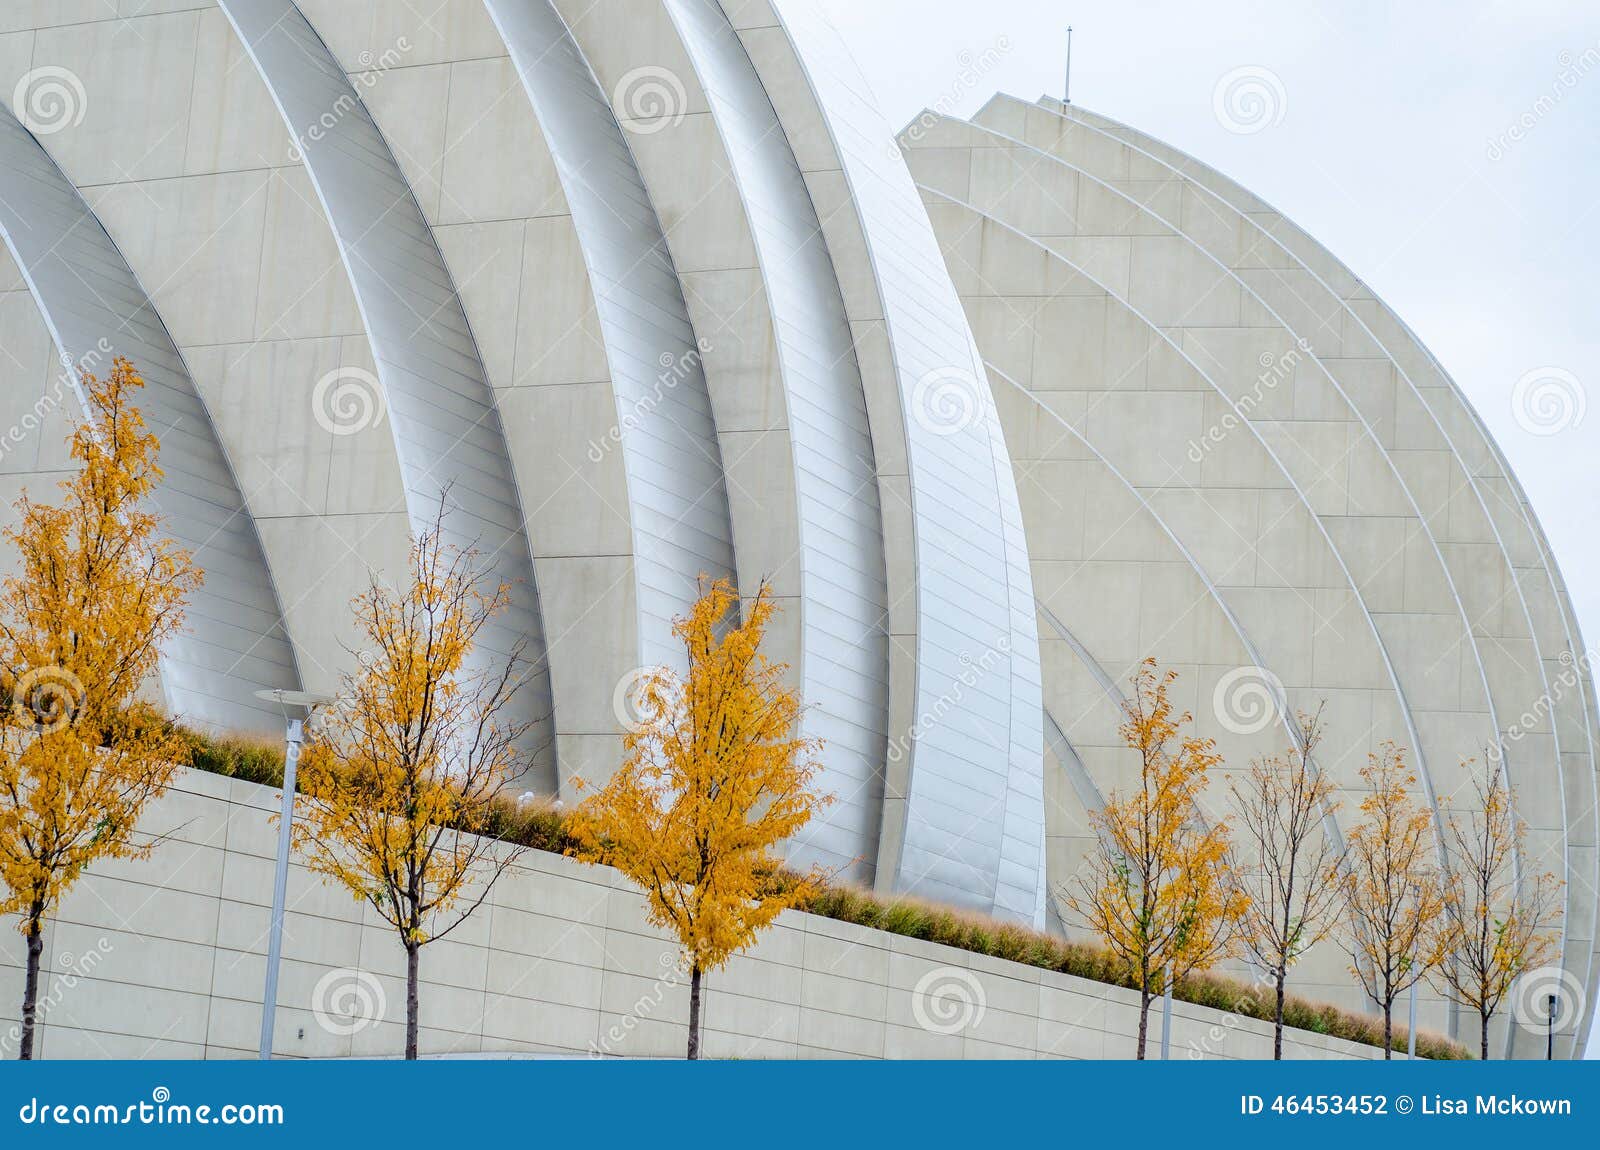 architecture of outside of kauffman center for the performing arts